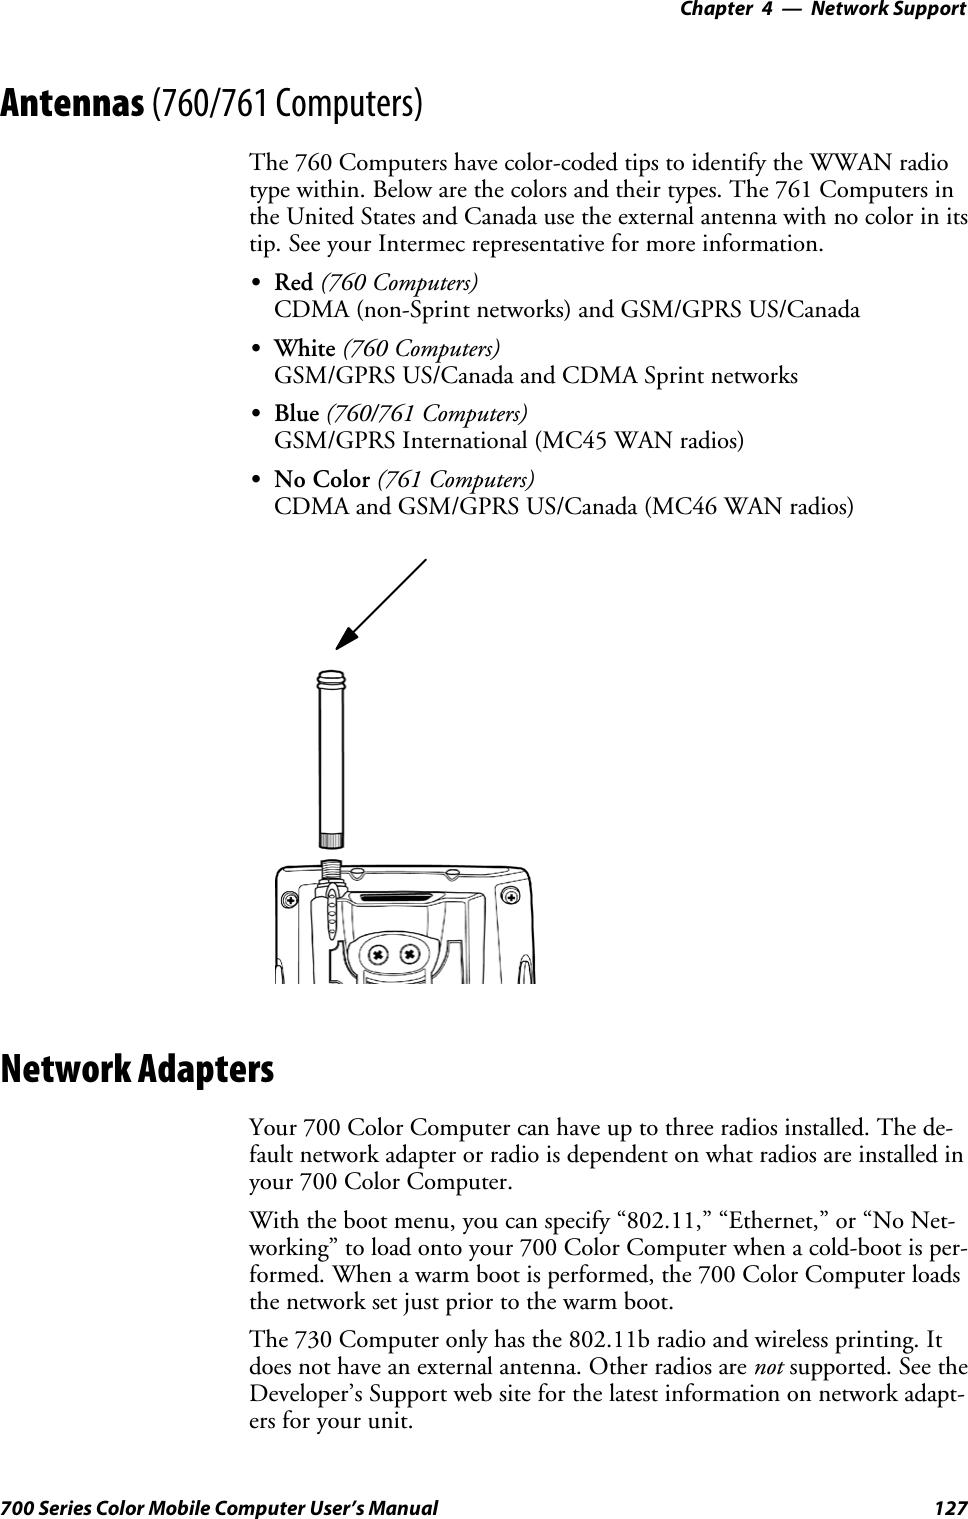 Network Support—Chapter 4127700 Series Color Mobile Computer User’s ManualAntennas (760/761 Computers)The 760 Computers have color-coded tips to identify the WWAN radiotype within. Below are the colors and their types. The 761 Computers inthe United States and Canada use the external antenna with no color in itstip. See your Intermec representative for more information.SRed (760 Computers)CDMA (non-Sprint networks) and GSM/GPRS US/CanadaSWhite (760 Computers)GSM/GPRS US/Canada and CDMA Sprint networksSBlue (760/761 Computers)GSM/GPRS International (MC45 WAN radios)SNo Color (761 Computers)CDMA and GSM/GPRS US/Canada (MC46 WAN radios)Network AdaptersYour 700 Color Computer can have up to three radios installed. The de-fault network adapter or radio is dependent on what radios are installed inyour 700 Color Computer.With the boot menu, you can specify “802.11,” “Ethernet,” or “No Net-working” to load onto your 700 Color Computer when a cold-boot is per-formed. When a warm boot is performed, the 700 Color Computer loadsthe network set just prior to the warm boot.The 730 Computer only has the 802.11b radio and wireless printing. Itdoes not have an external antenna. Other radios are not supported. See theDeveloper’s Support web site for the latest information on network adapt-ers for your unit.